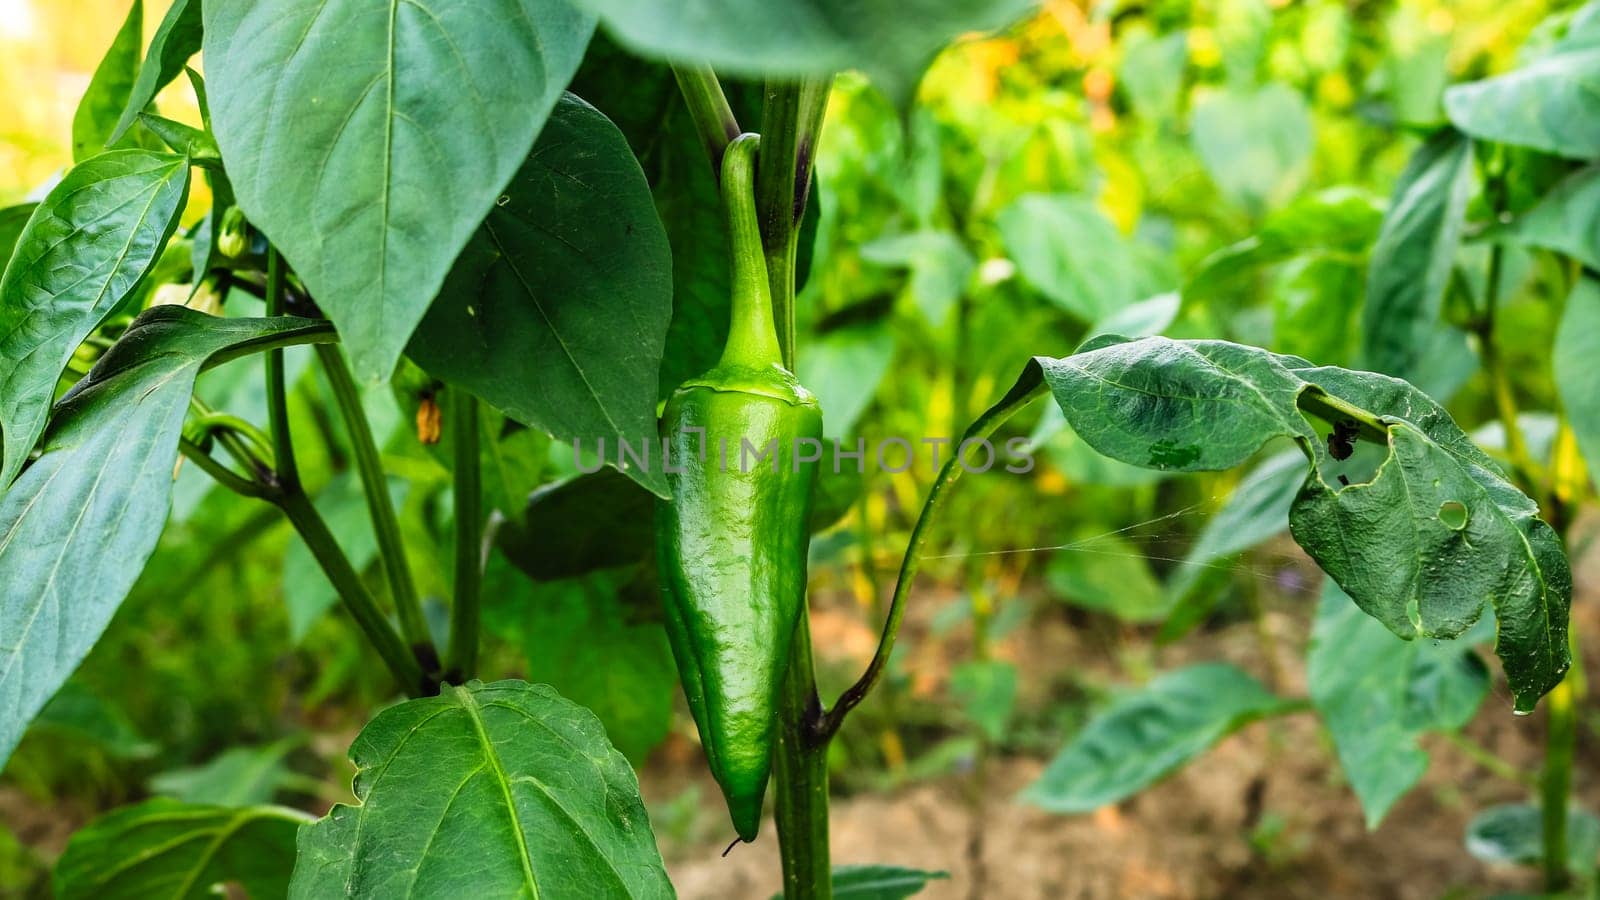 Close up photo of unripe hot green pepper on a branch in the garden.